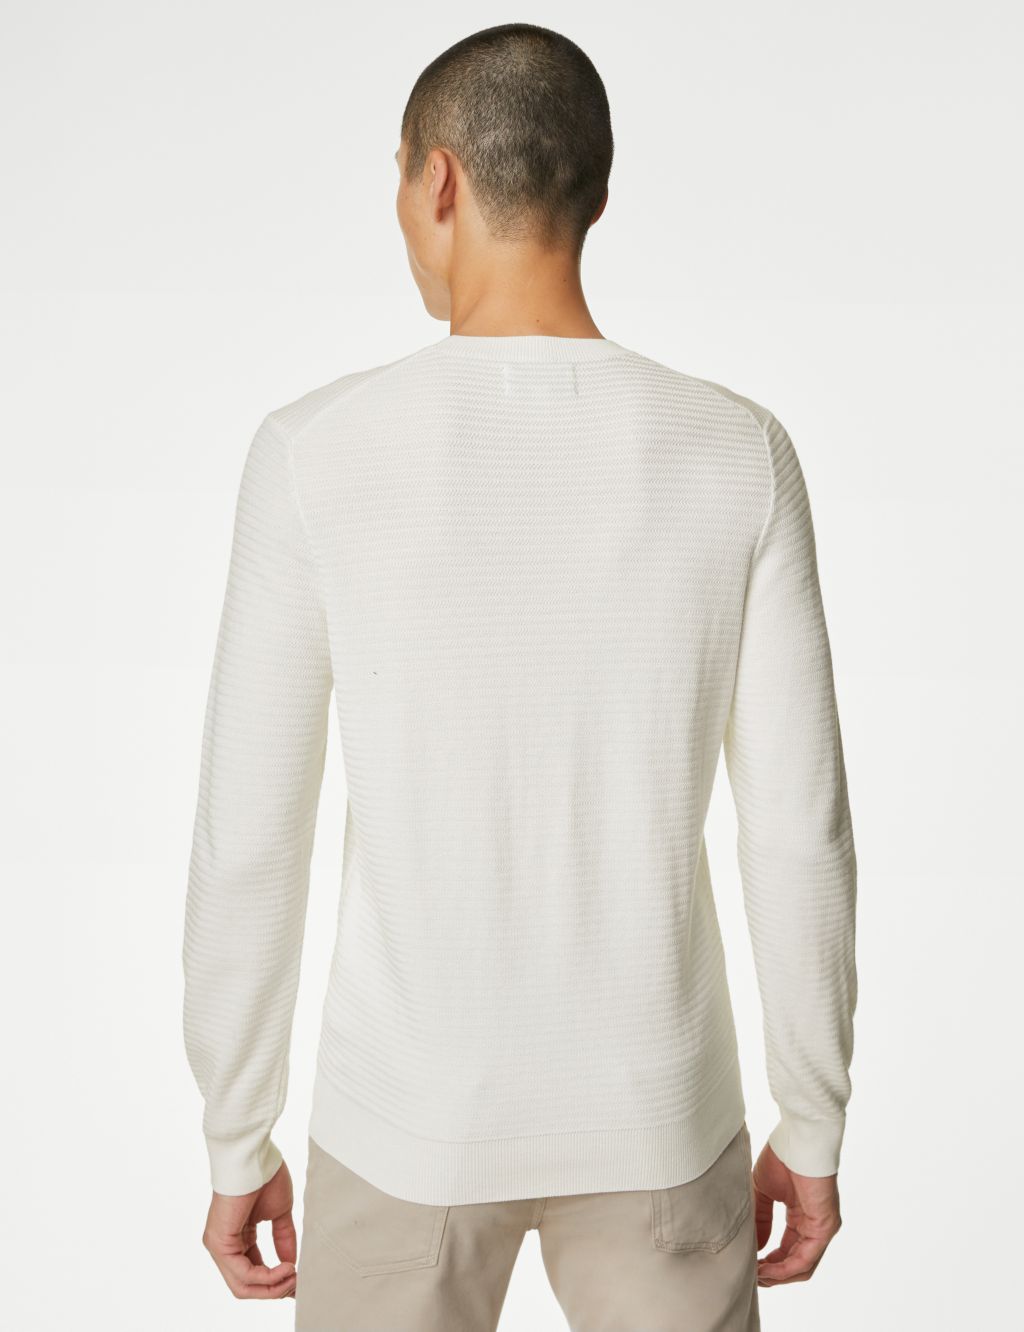 Cotton and Modal Blend Textured Crew Neck Jumper image 5